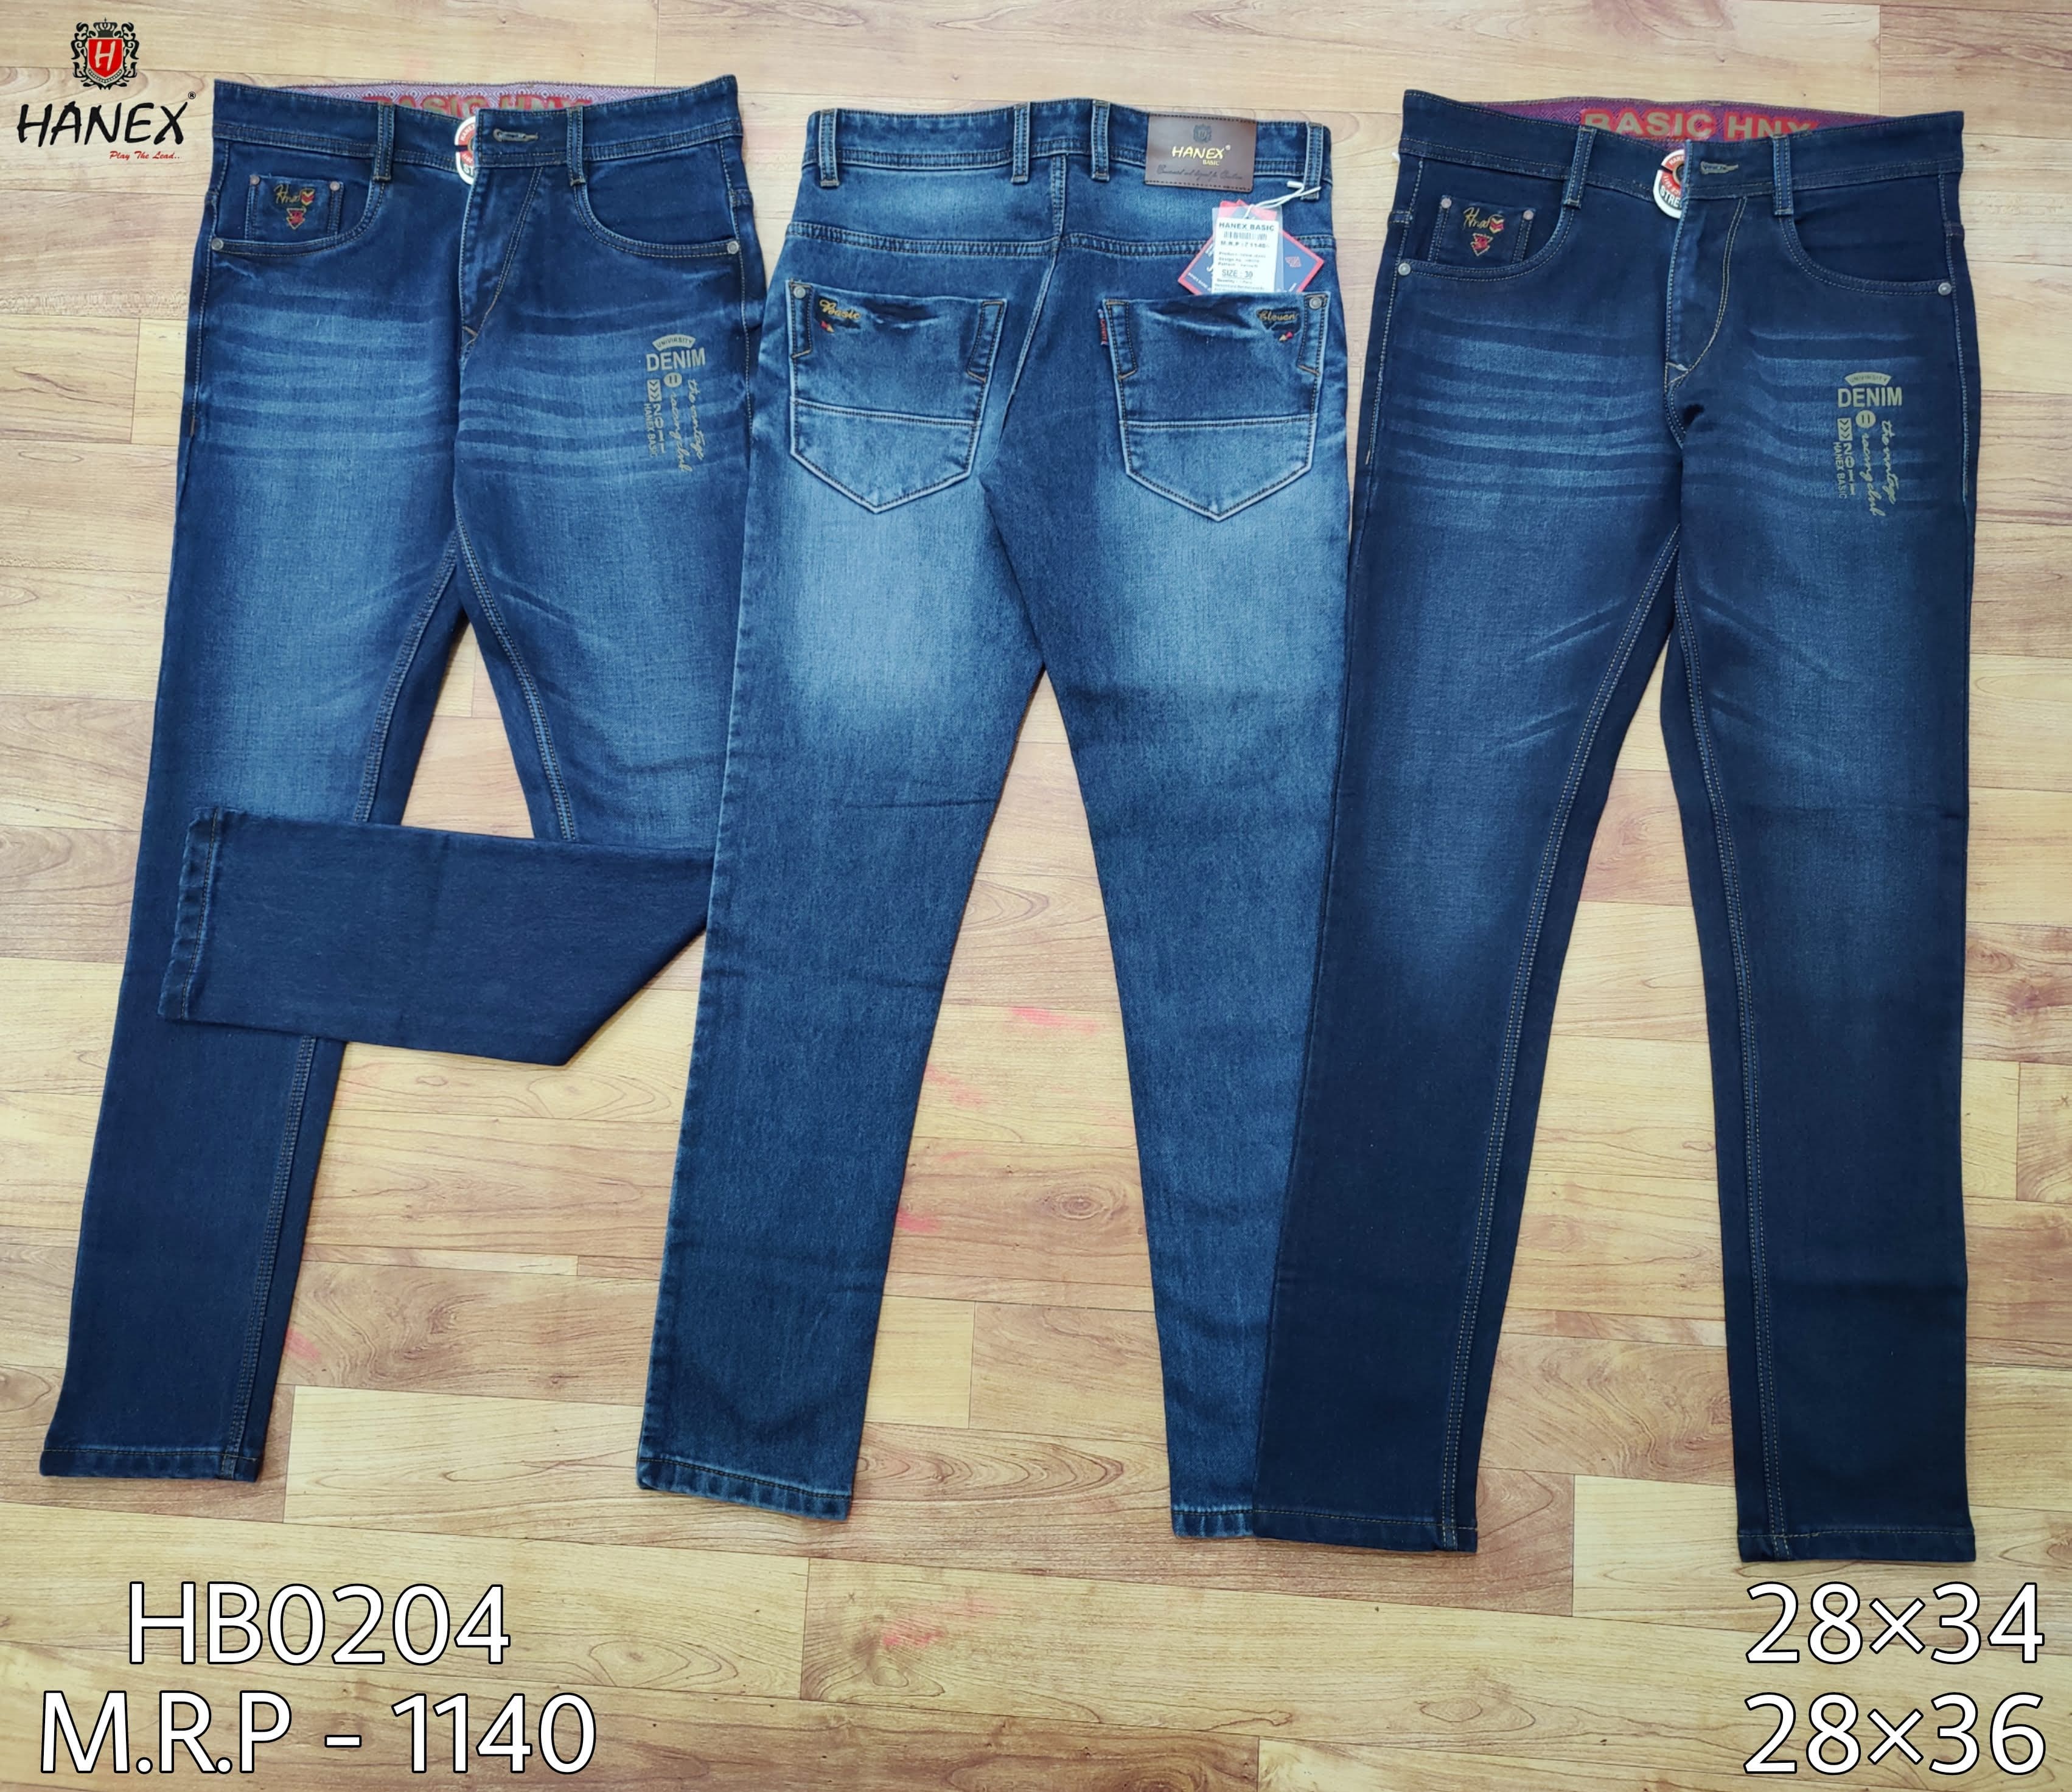 Hanex Knitted Denim Faded Jeans